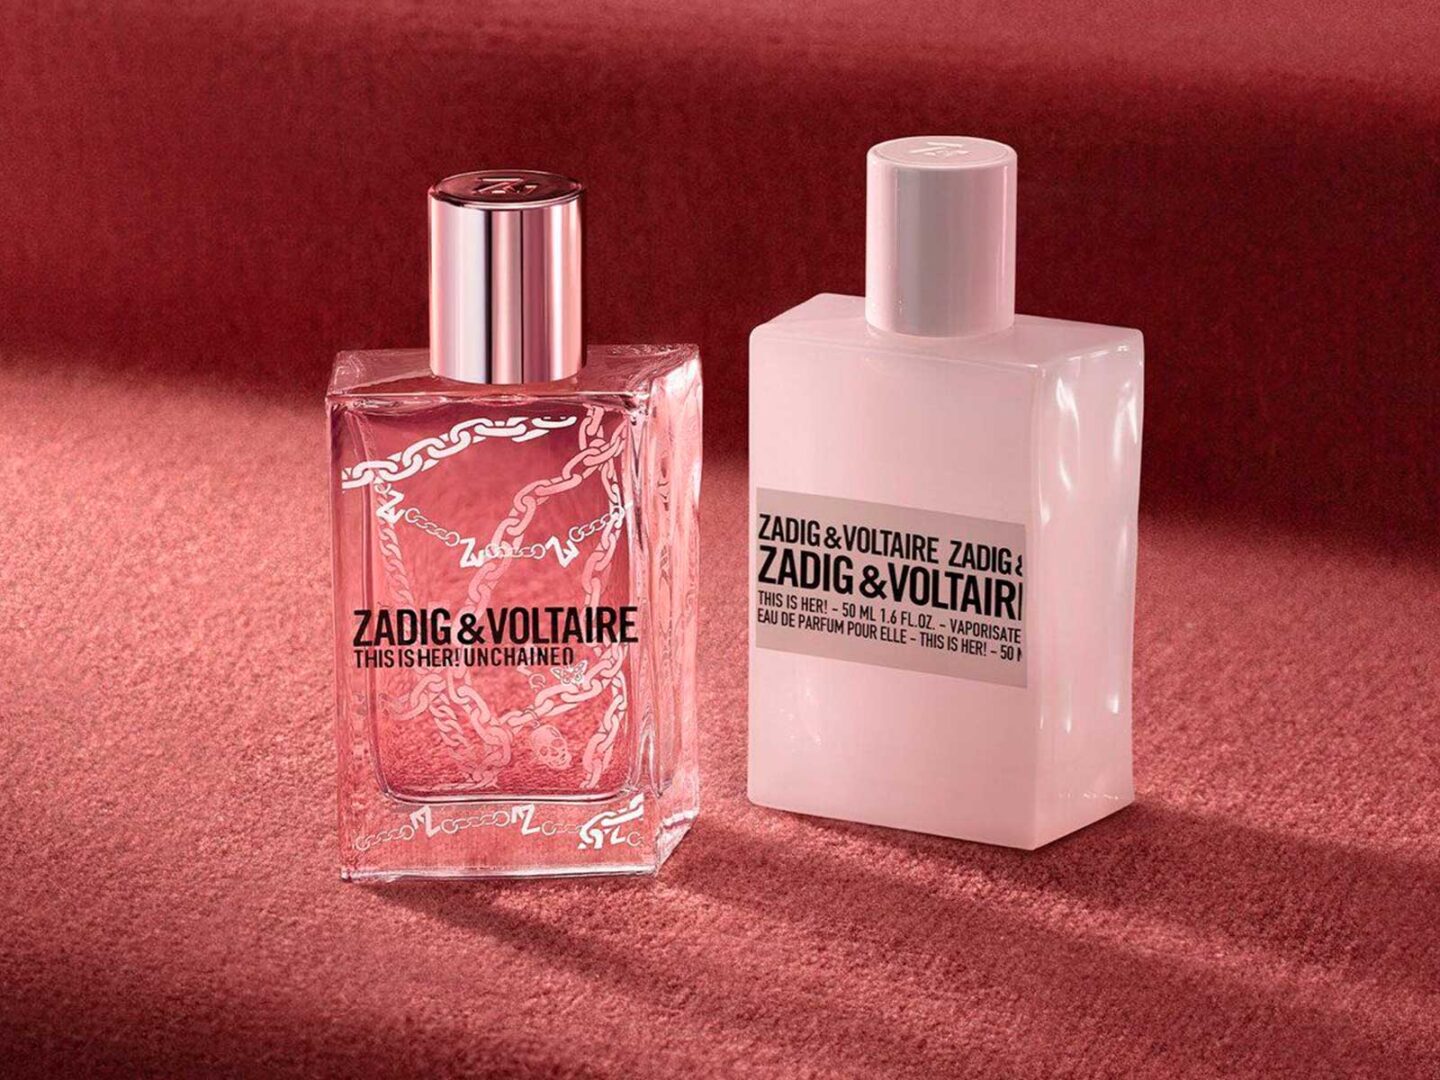 Zadig&Voltaire launches a new limited edition of ‘This is Her!